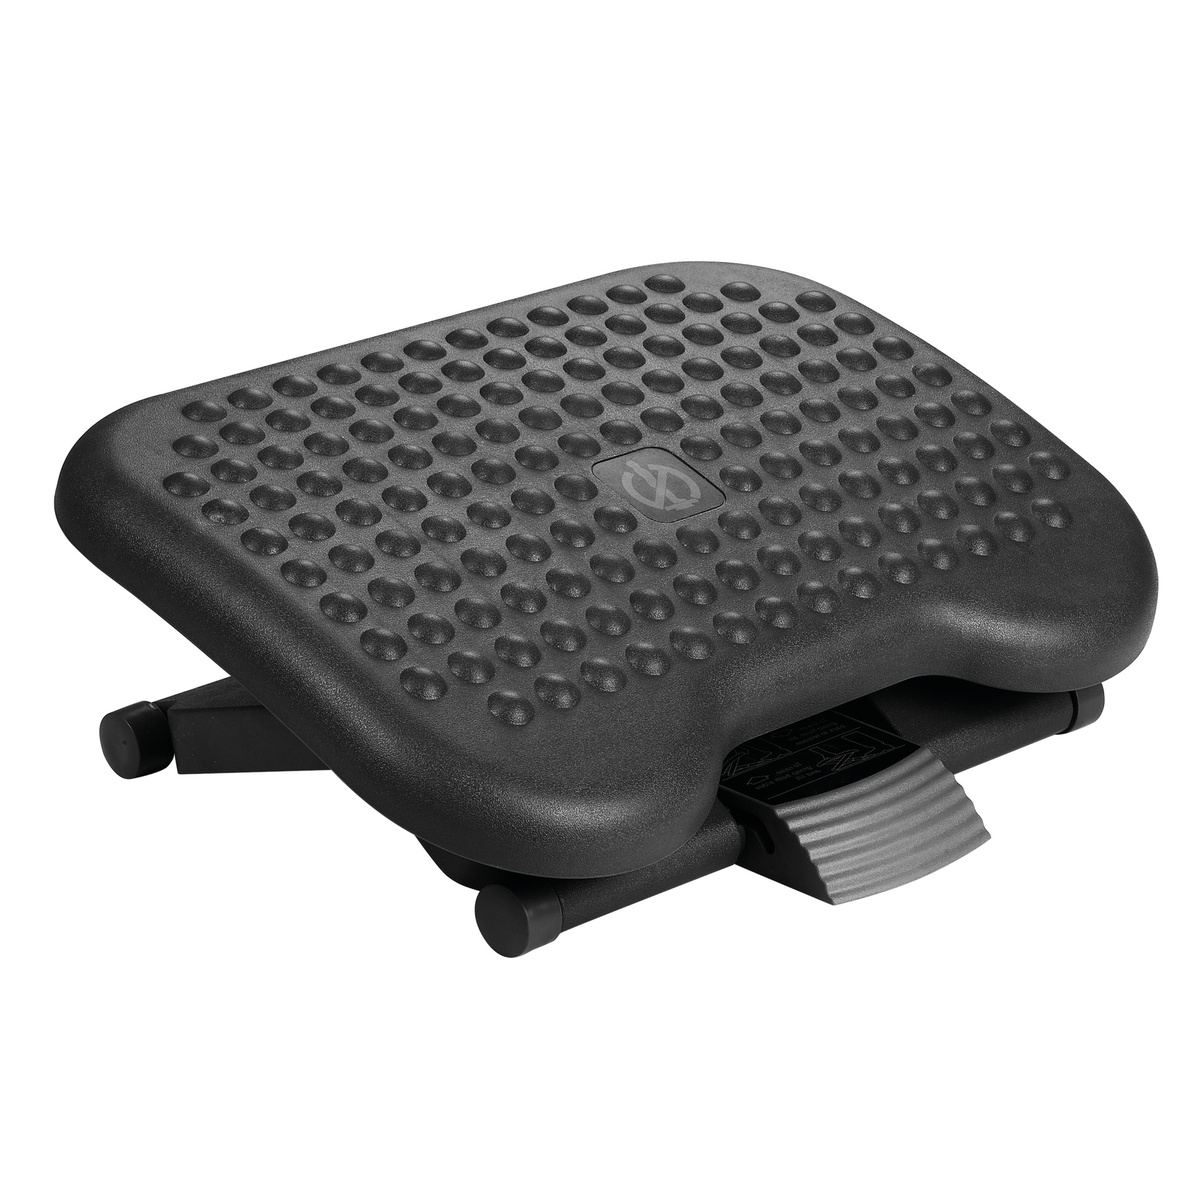 Ergonomic office footrest adjustable in angle and height